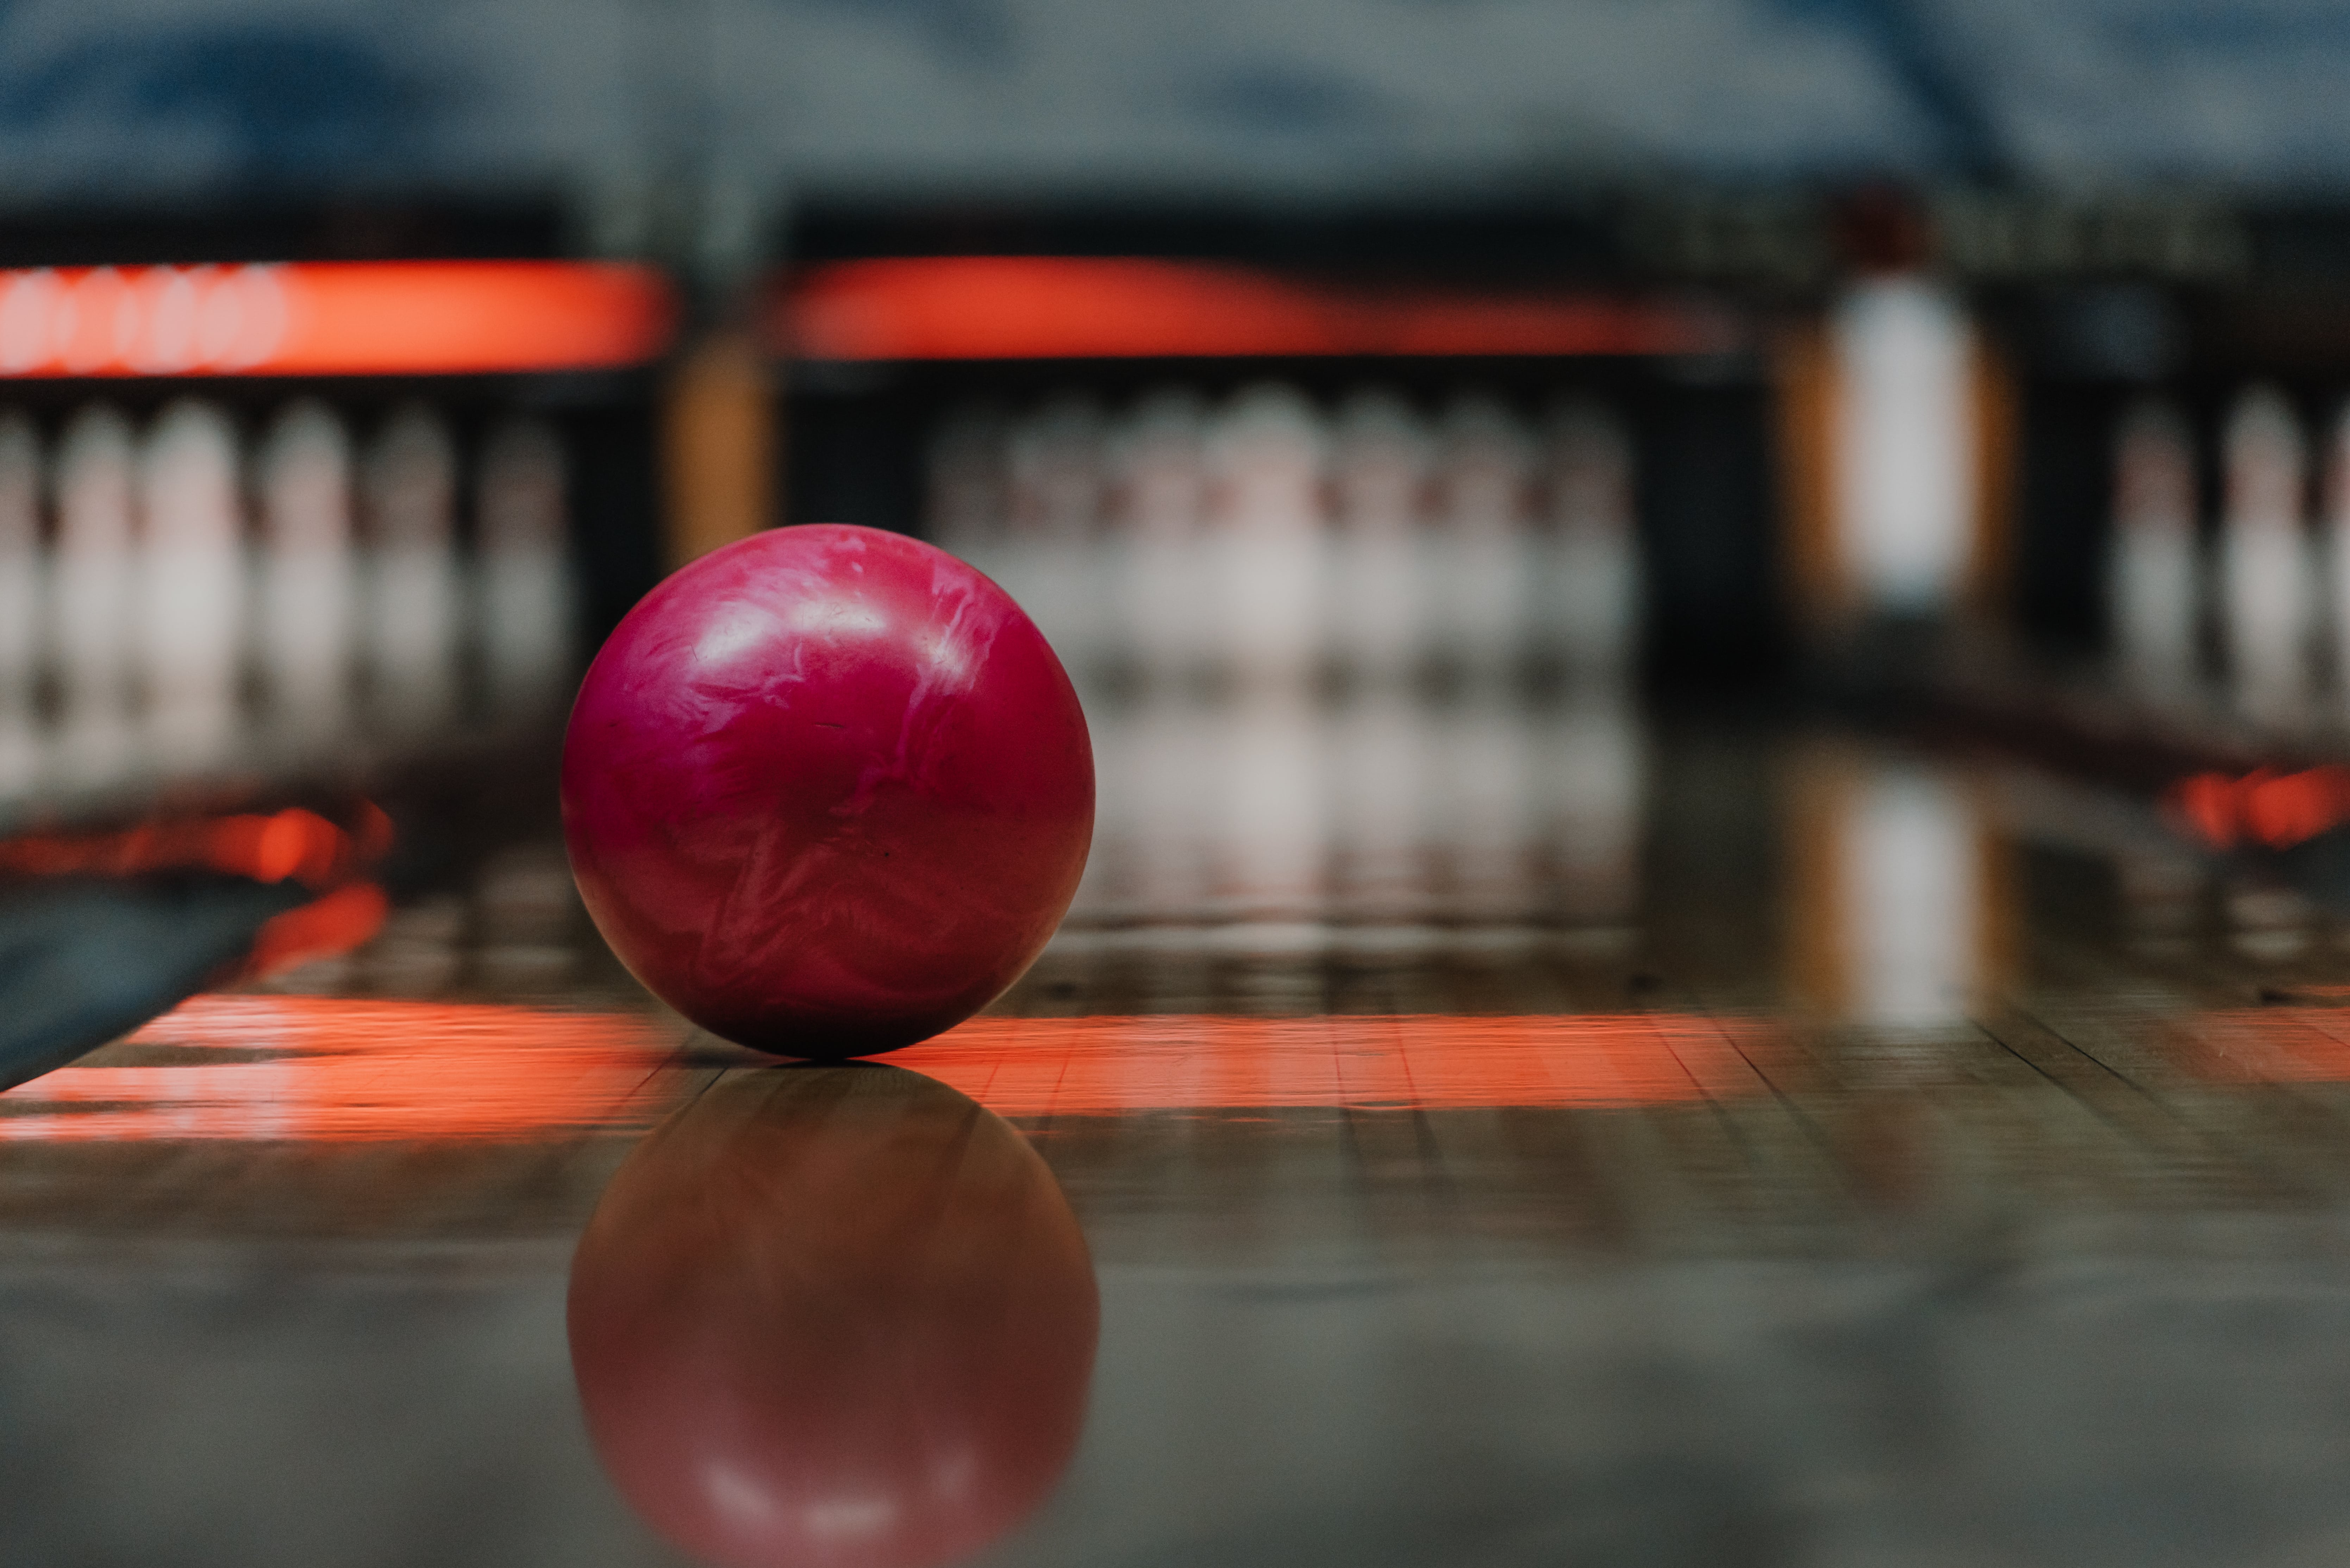 How much does a bowling ball weigh?